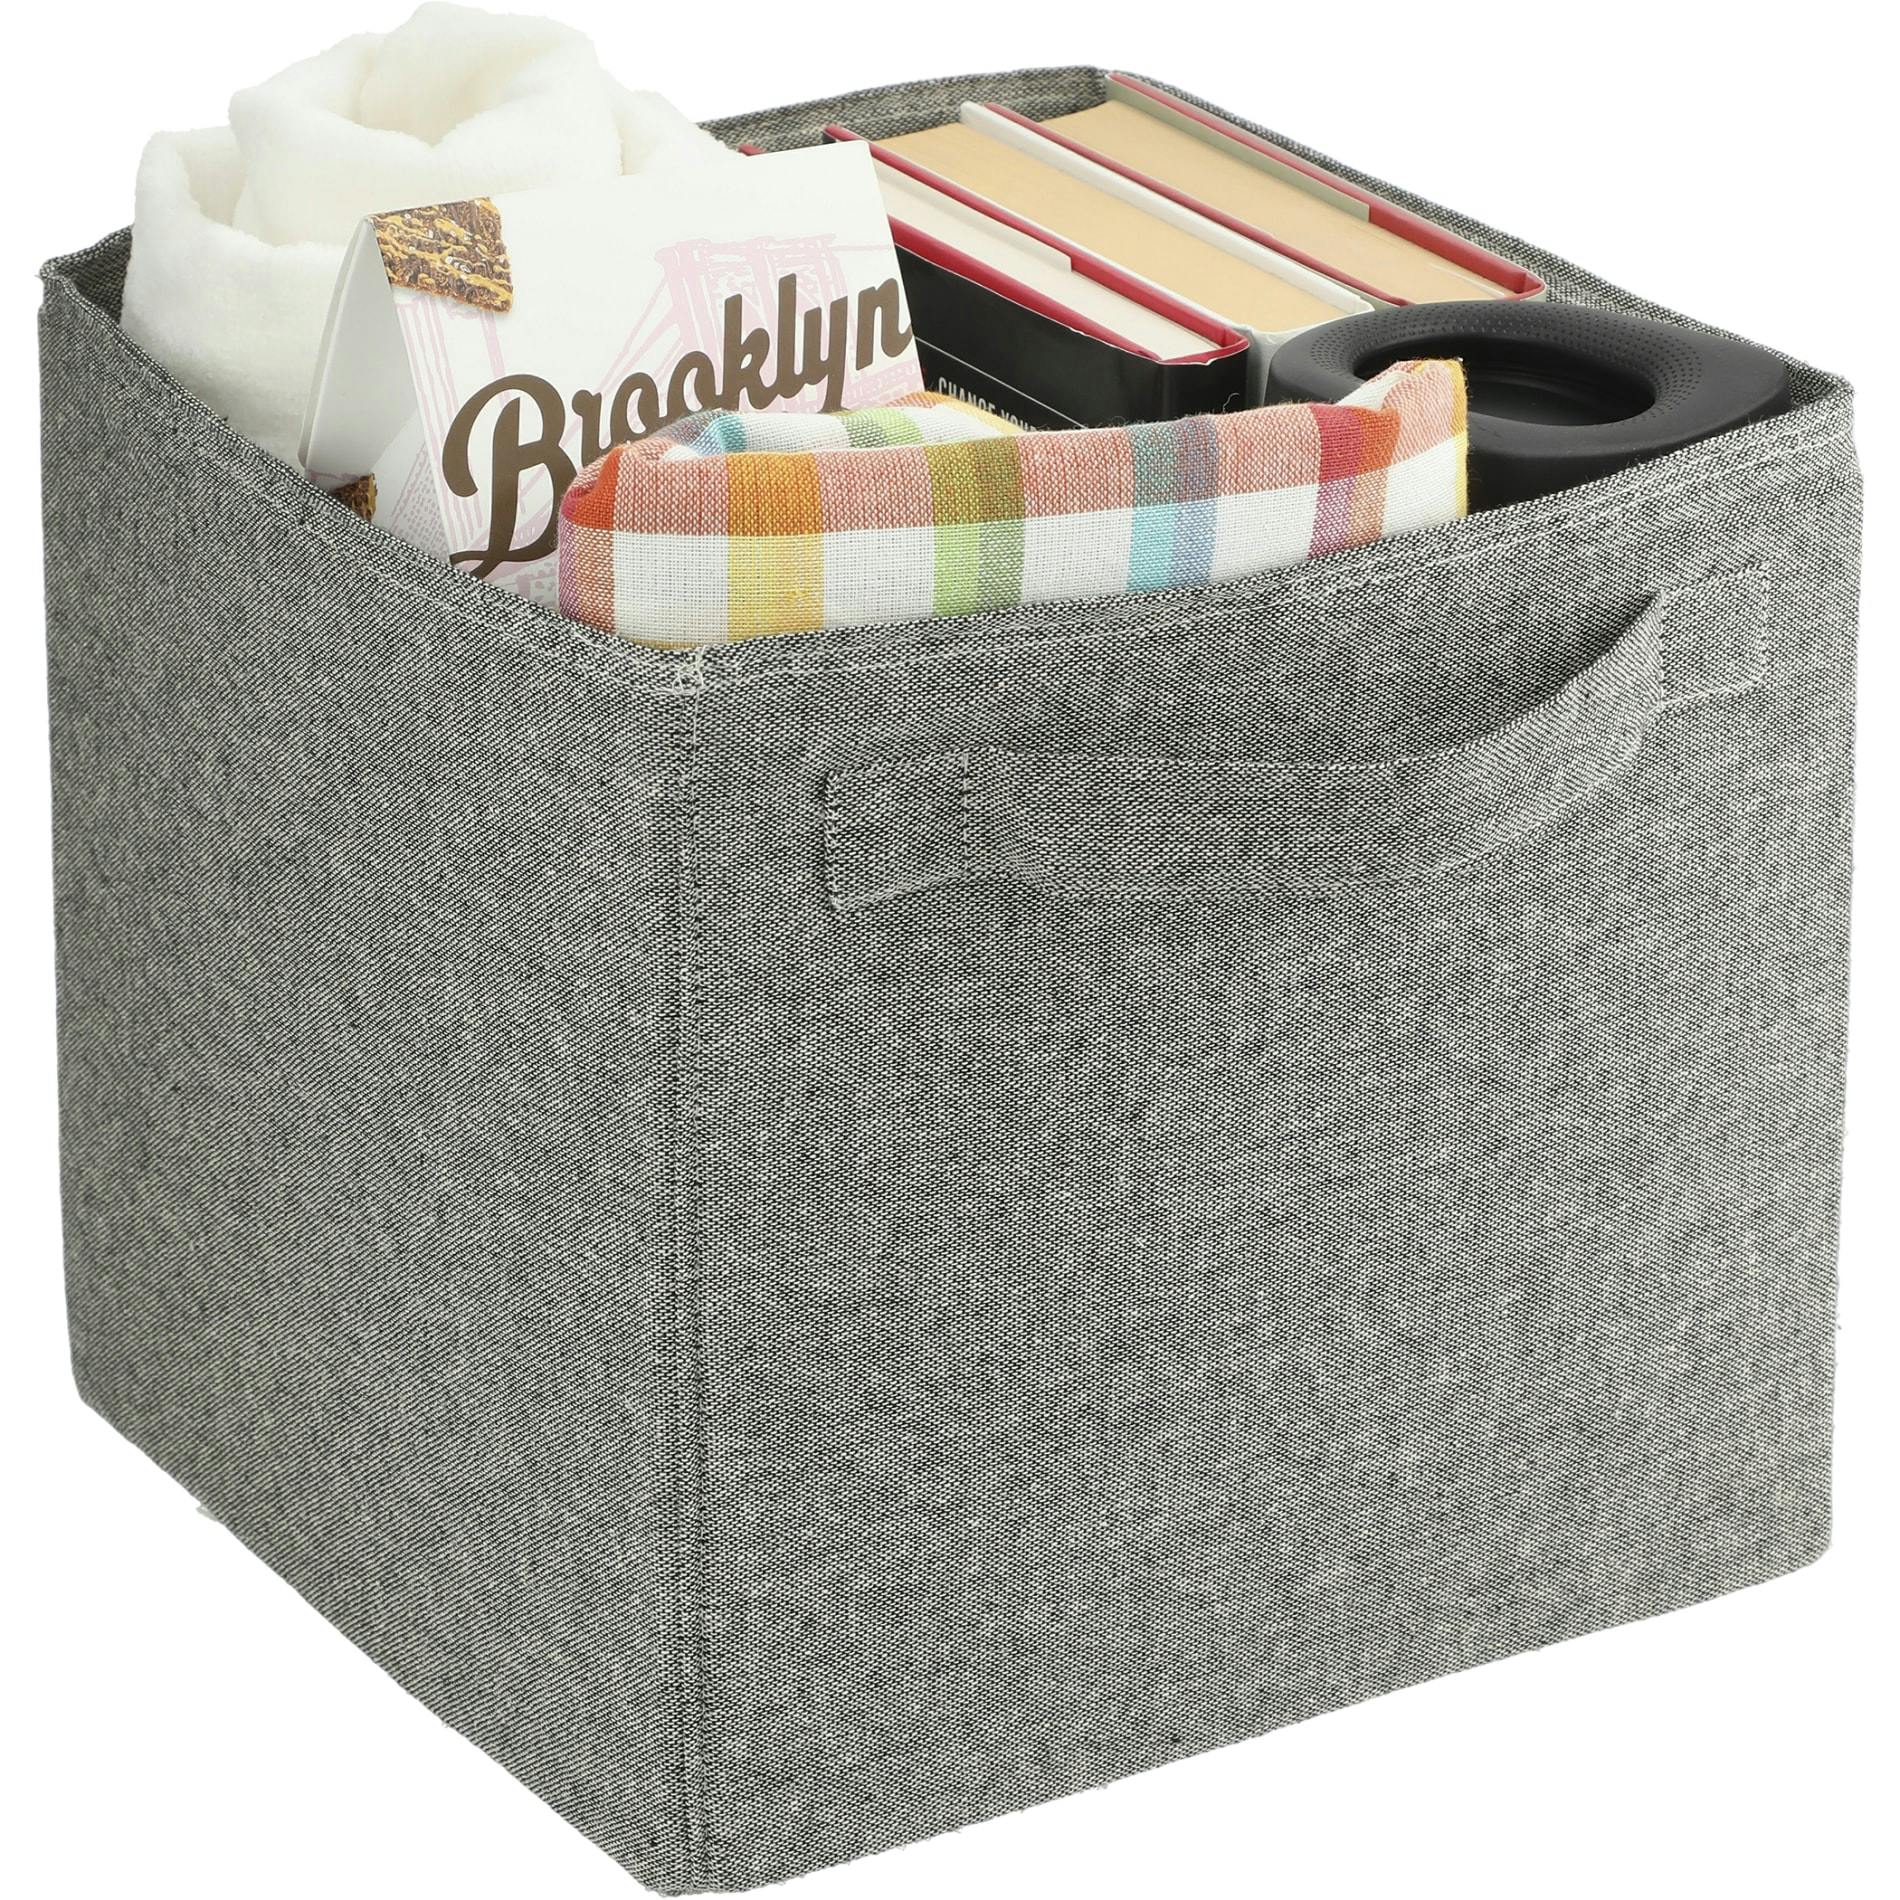 Recycled Cotton Storage Cube - additional Image 3